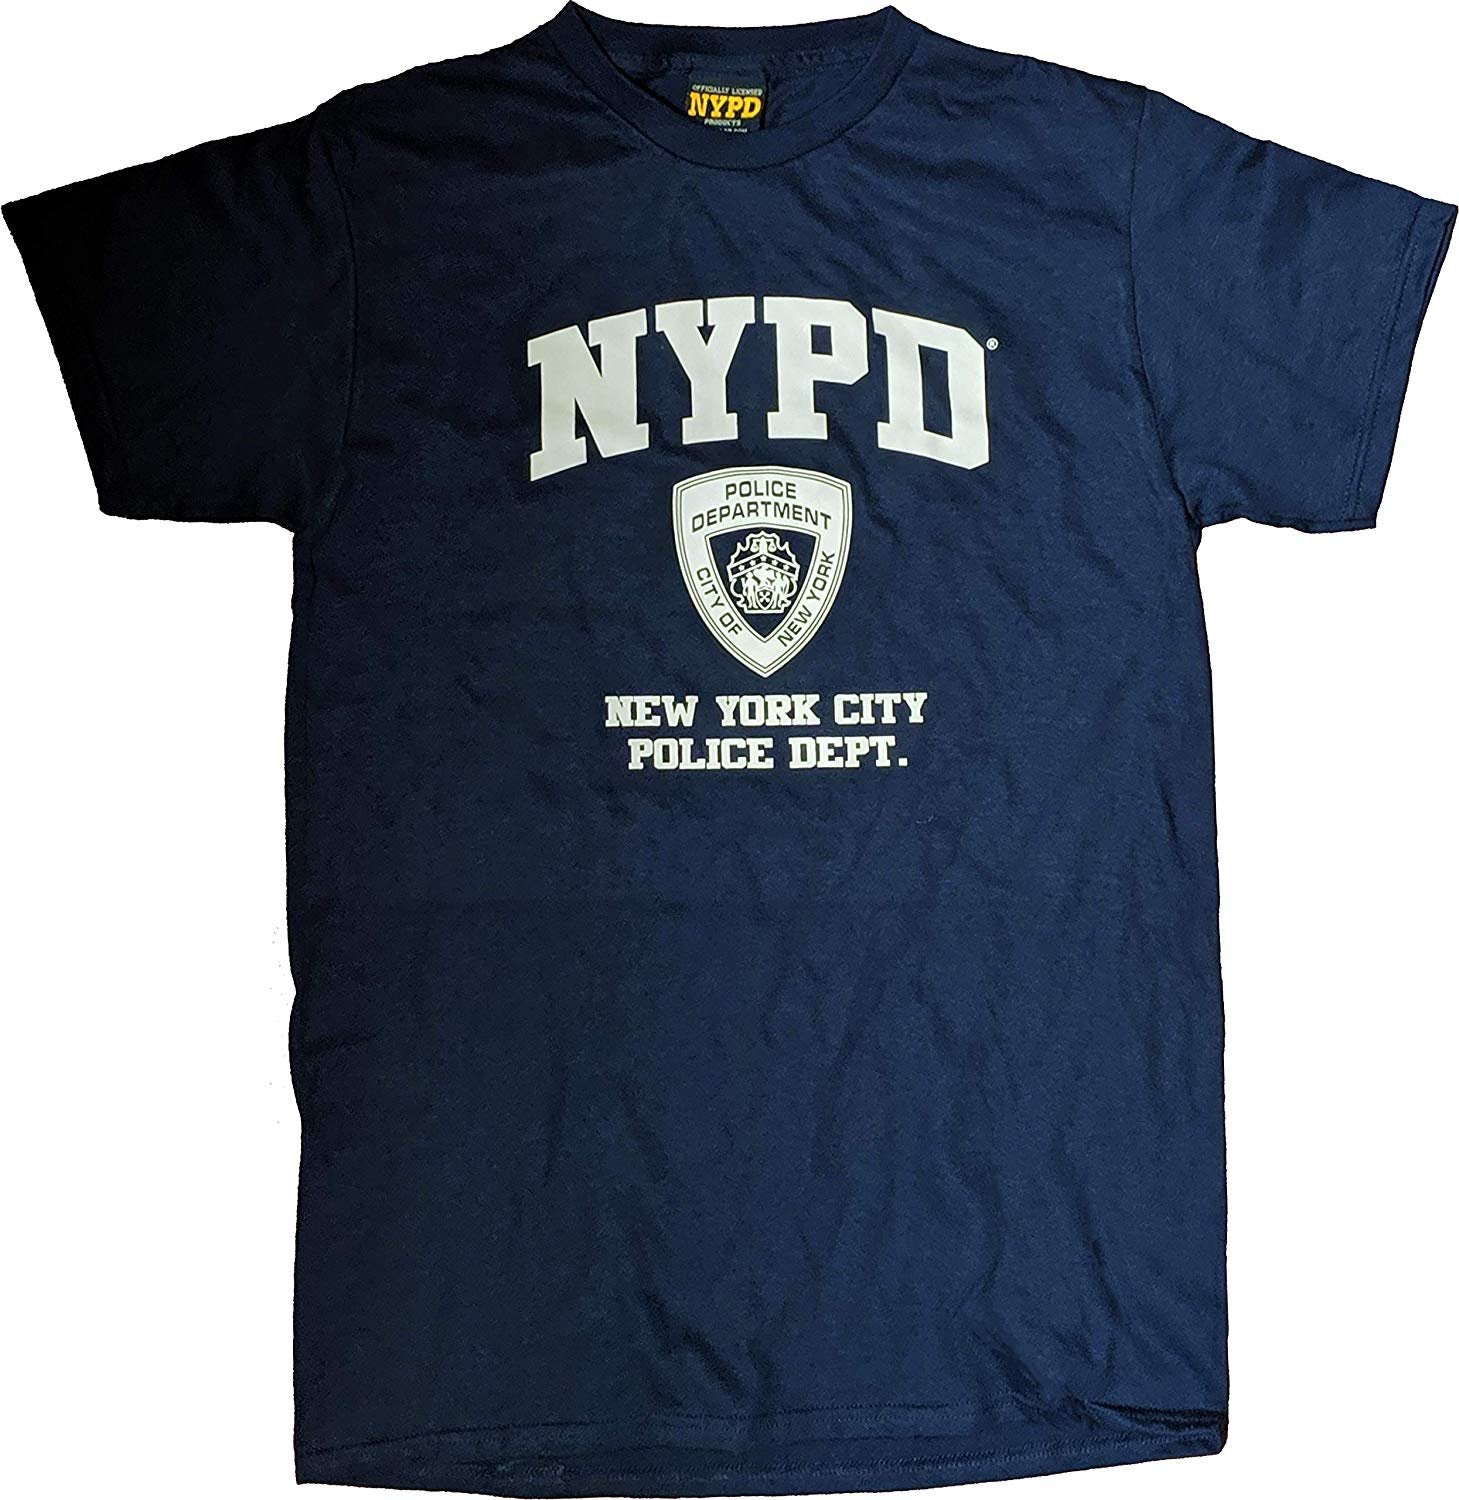 NYPD Short Sleeve White Print T-Shirt Navy Officially Licensed